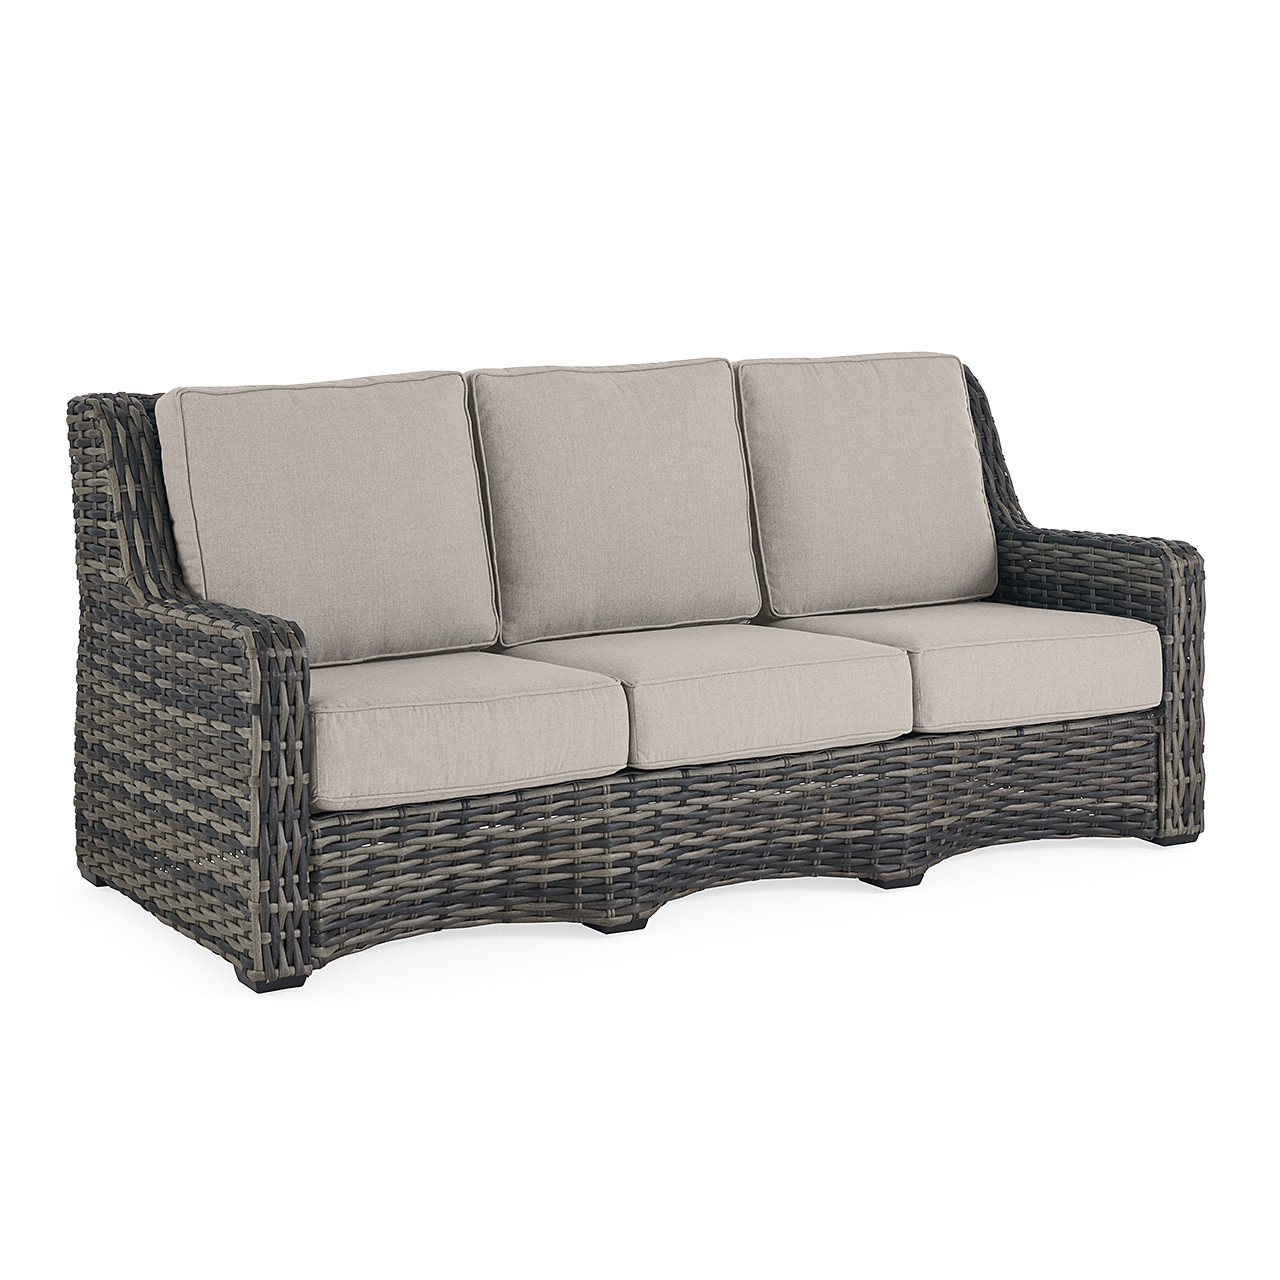 Tangiers Outdoor Wicker with Cushions 4 Piece Sofa Group + Swivel Club Chairs + 46 x 26 in. Glass Top Coffee Table